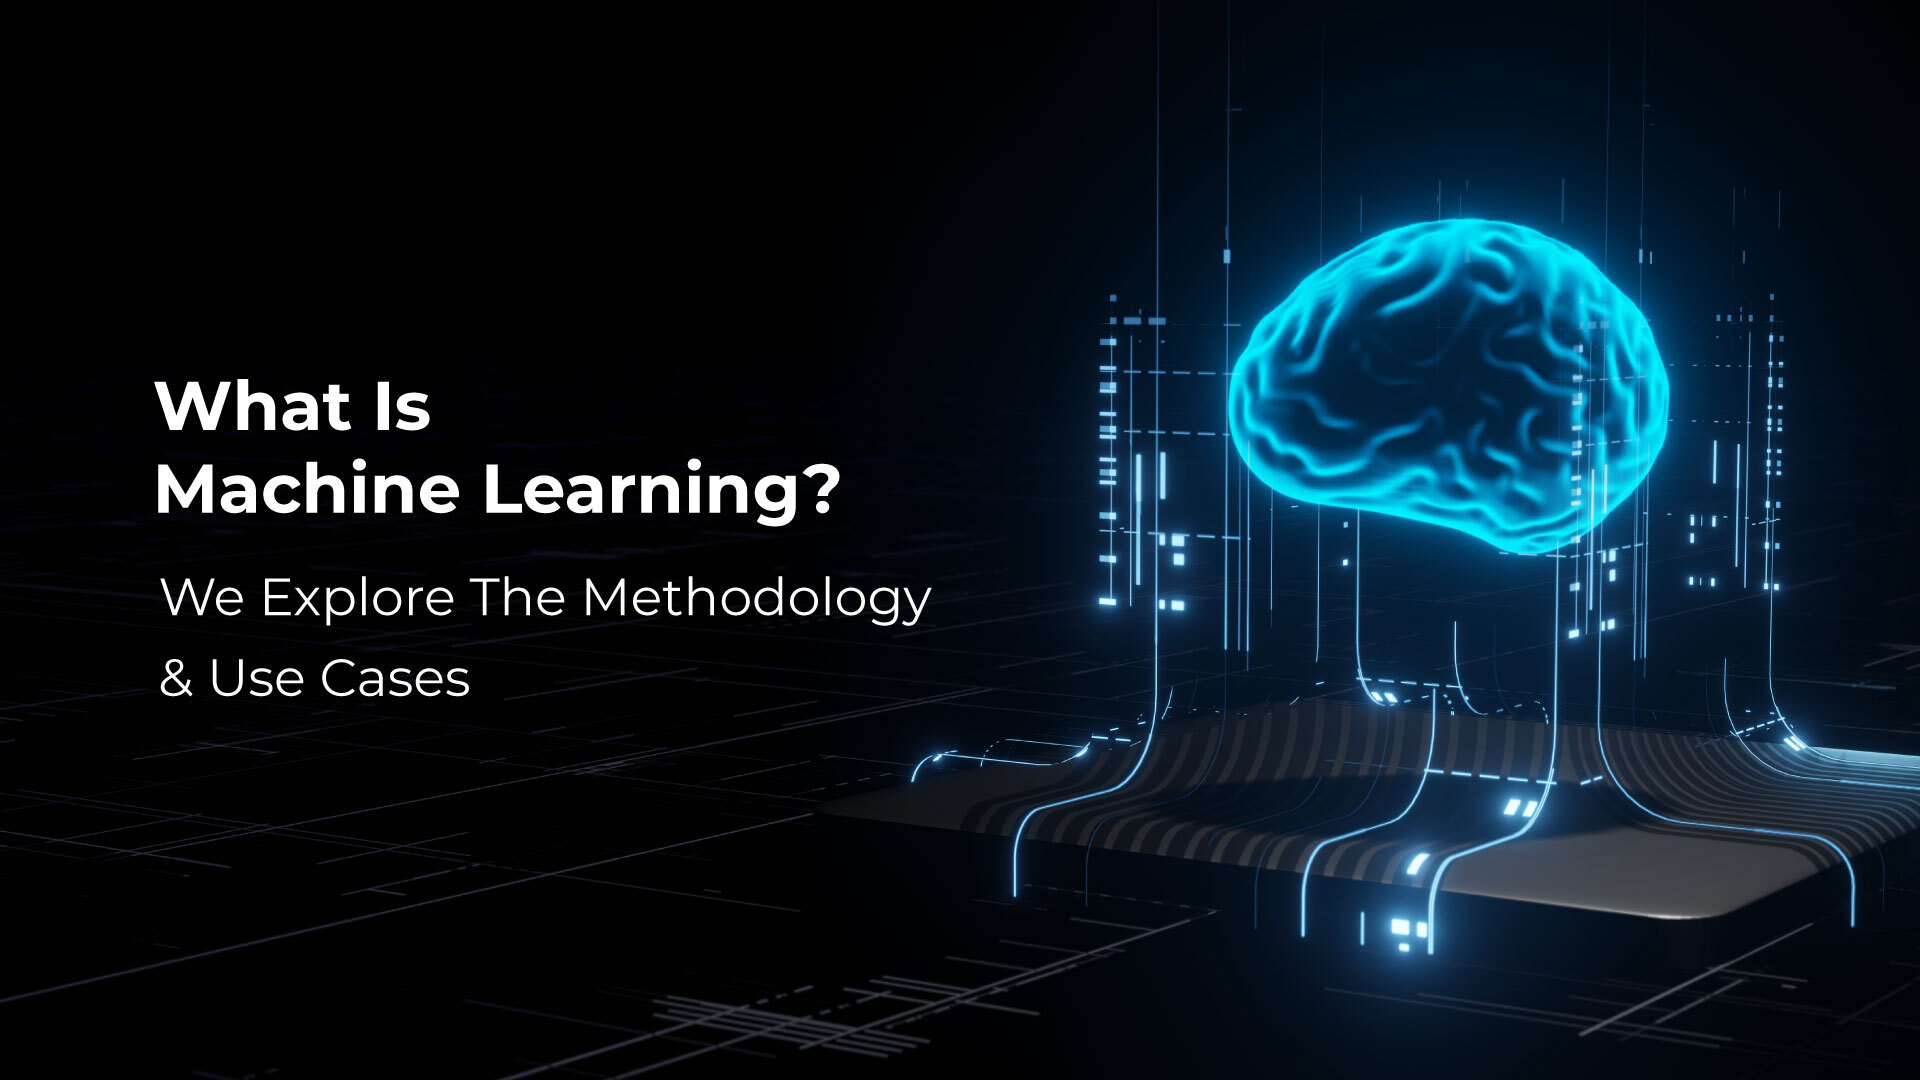 What Is Machine Learning? We Explore The Methodology & Use Cases